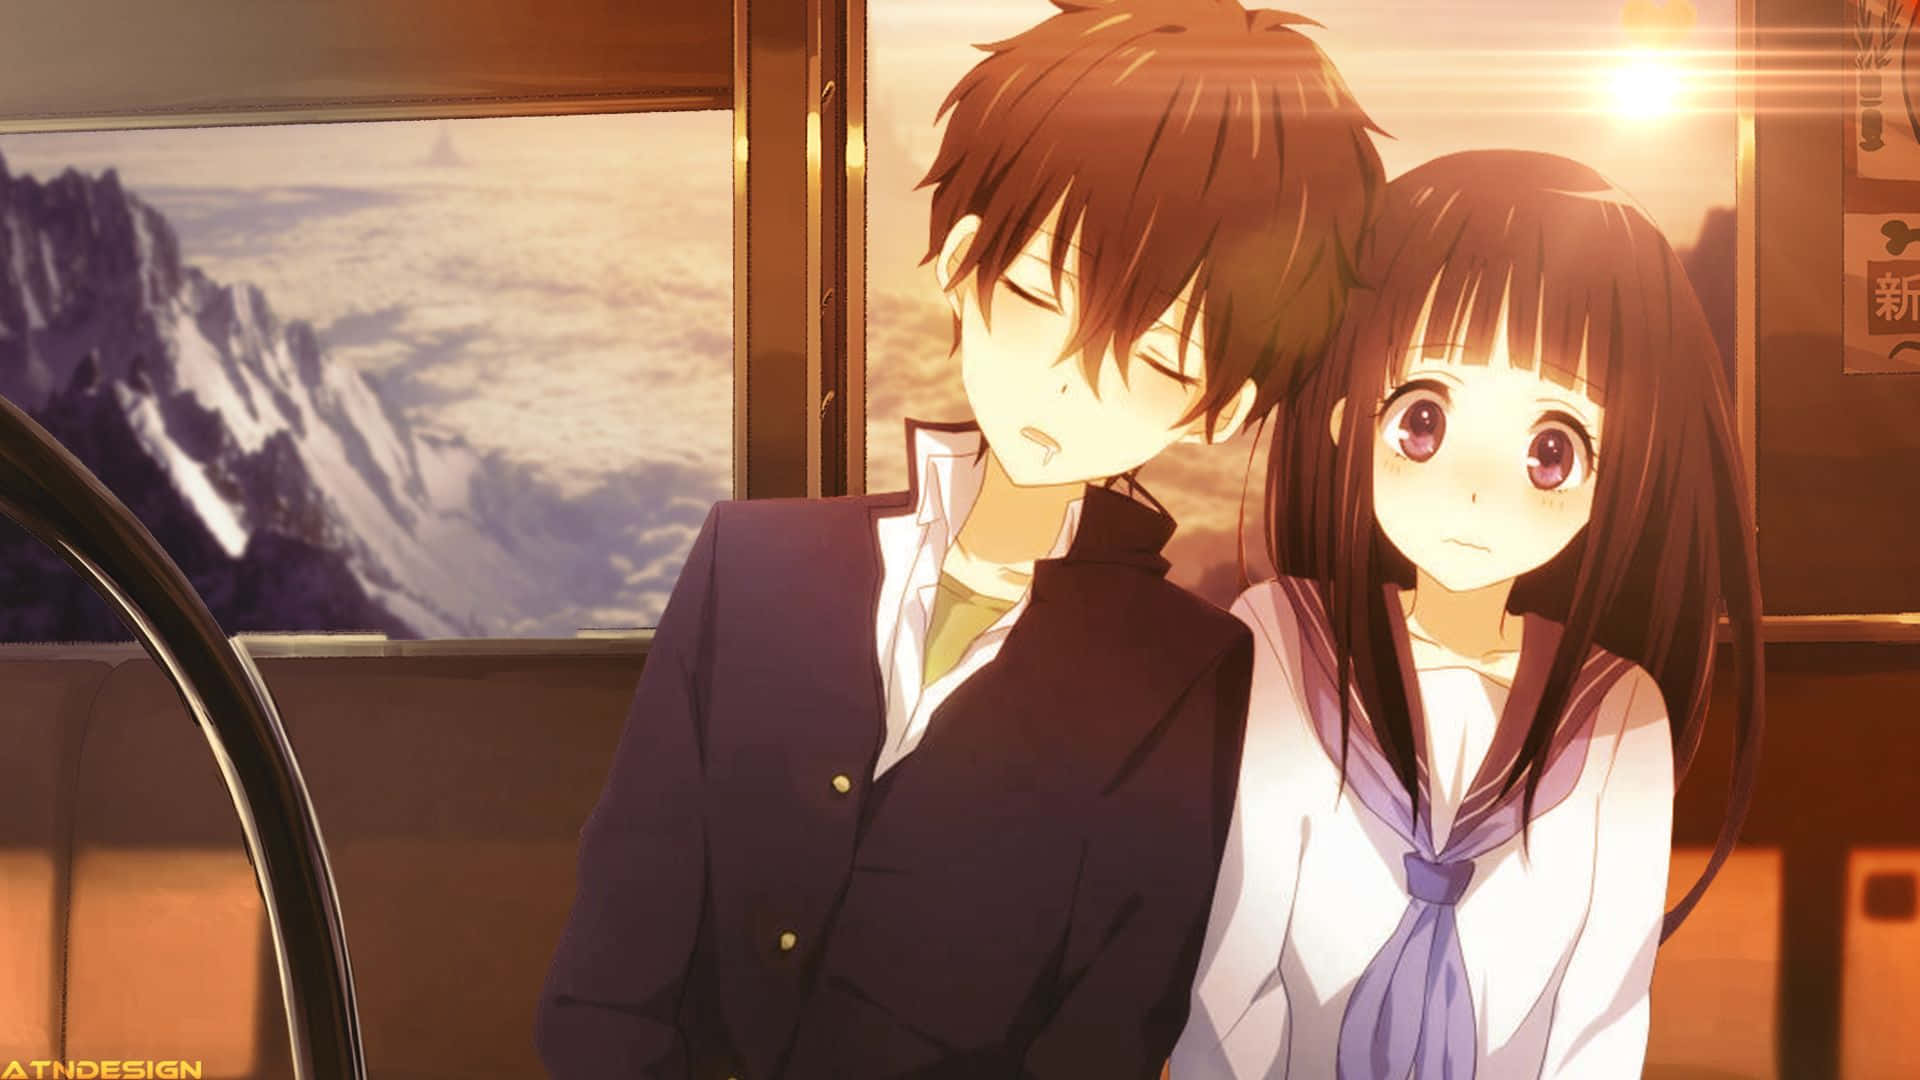 Love is in the air as this happy Anime couple share a moment of passion.